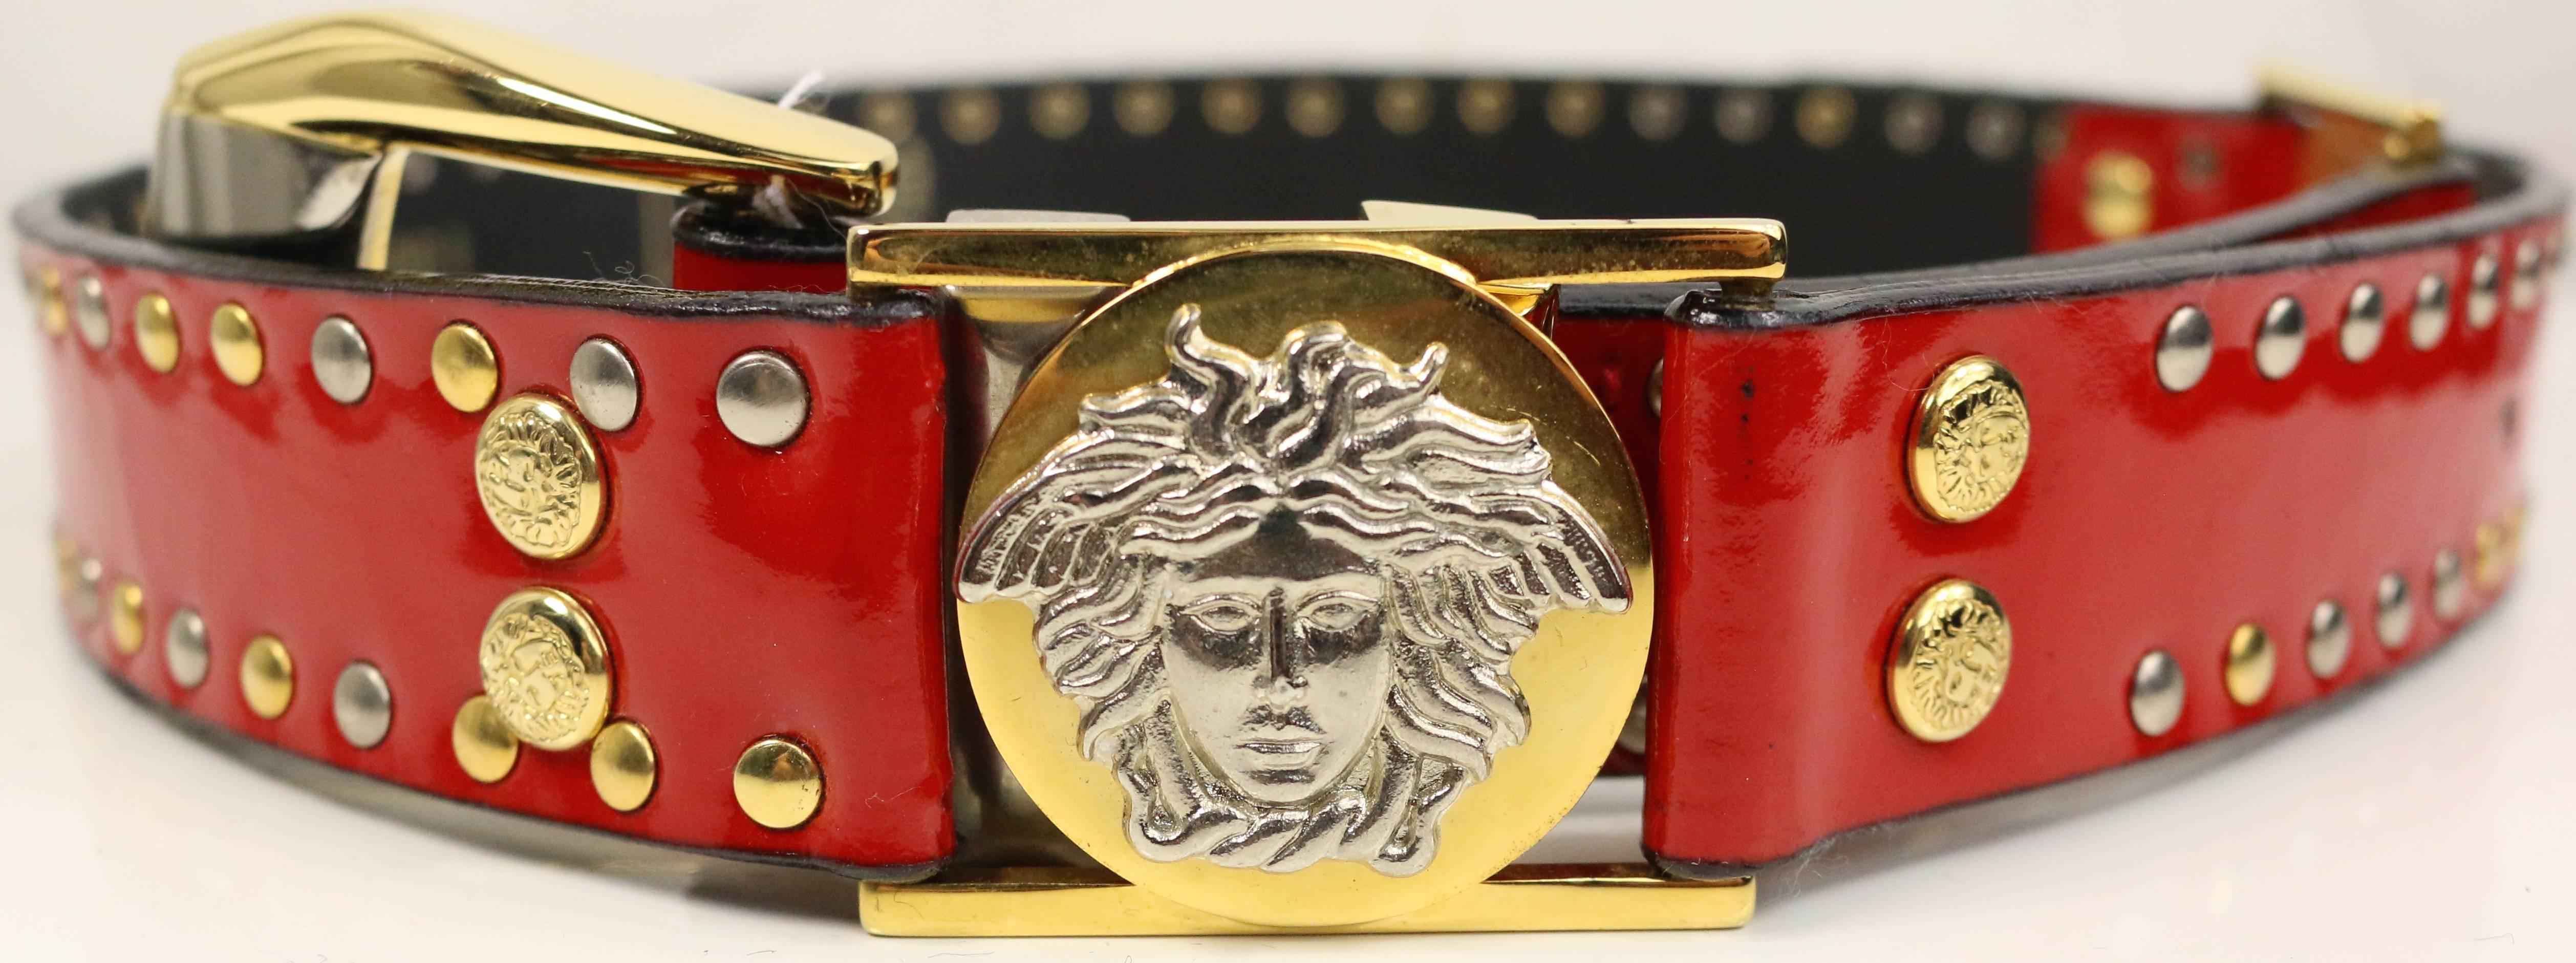 - Vintage 90s Gianni Versace red patent leather belt. Featuring  two 